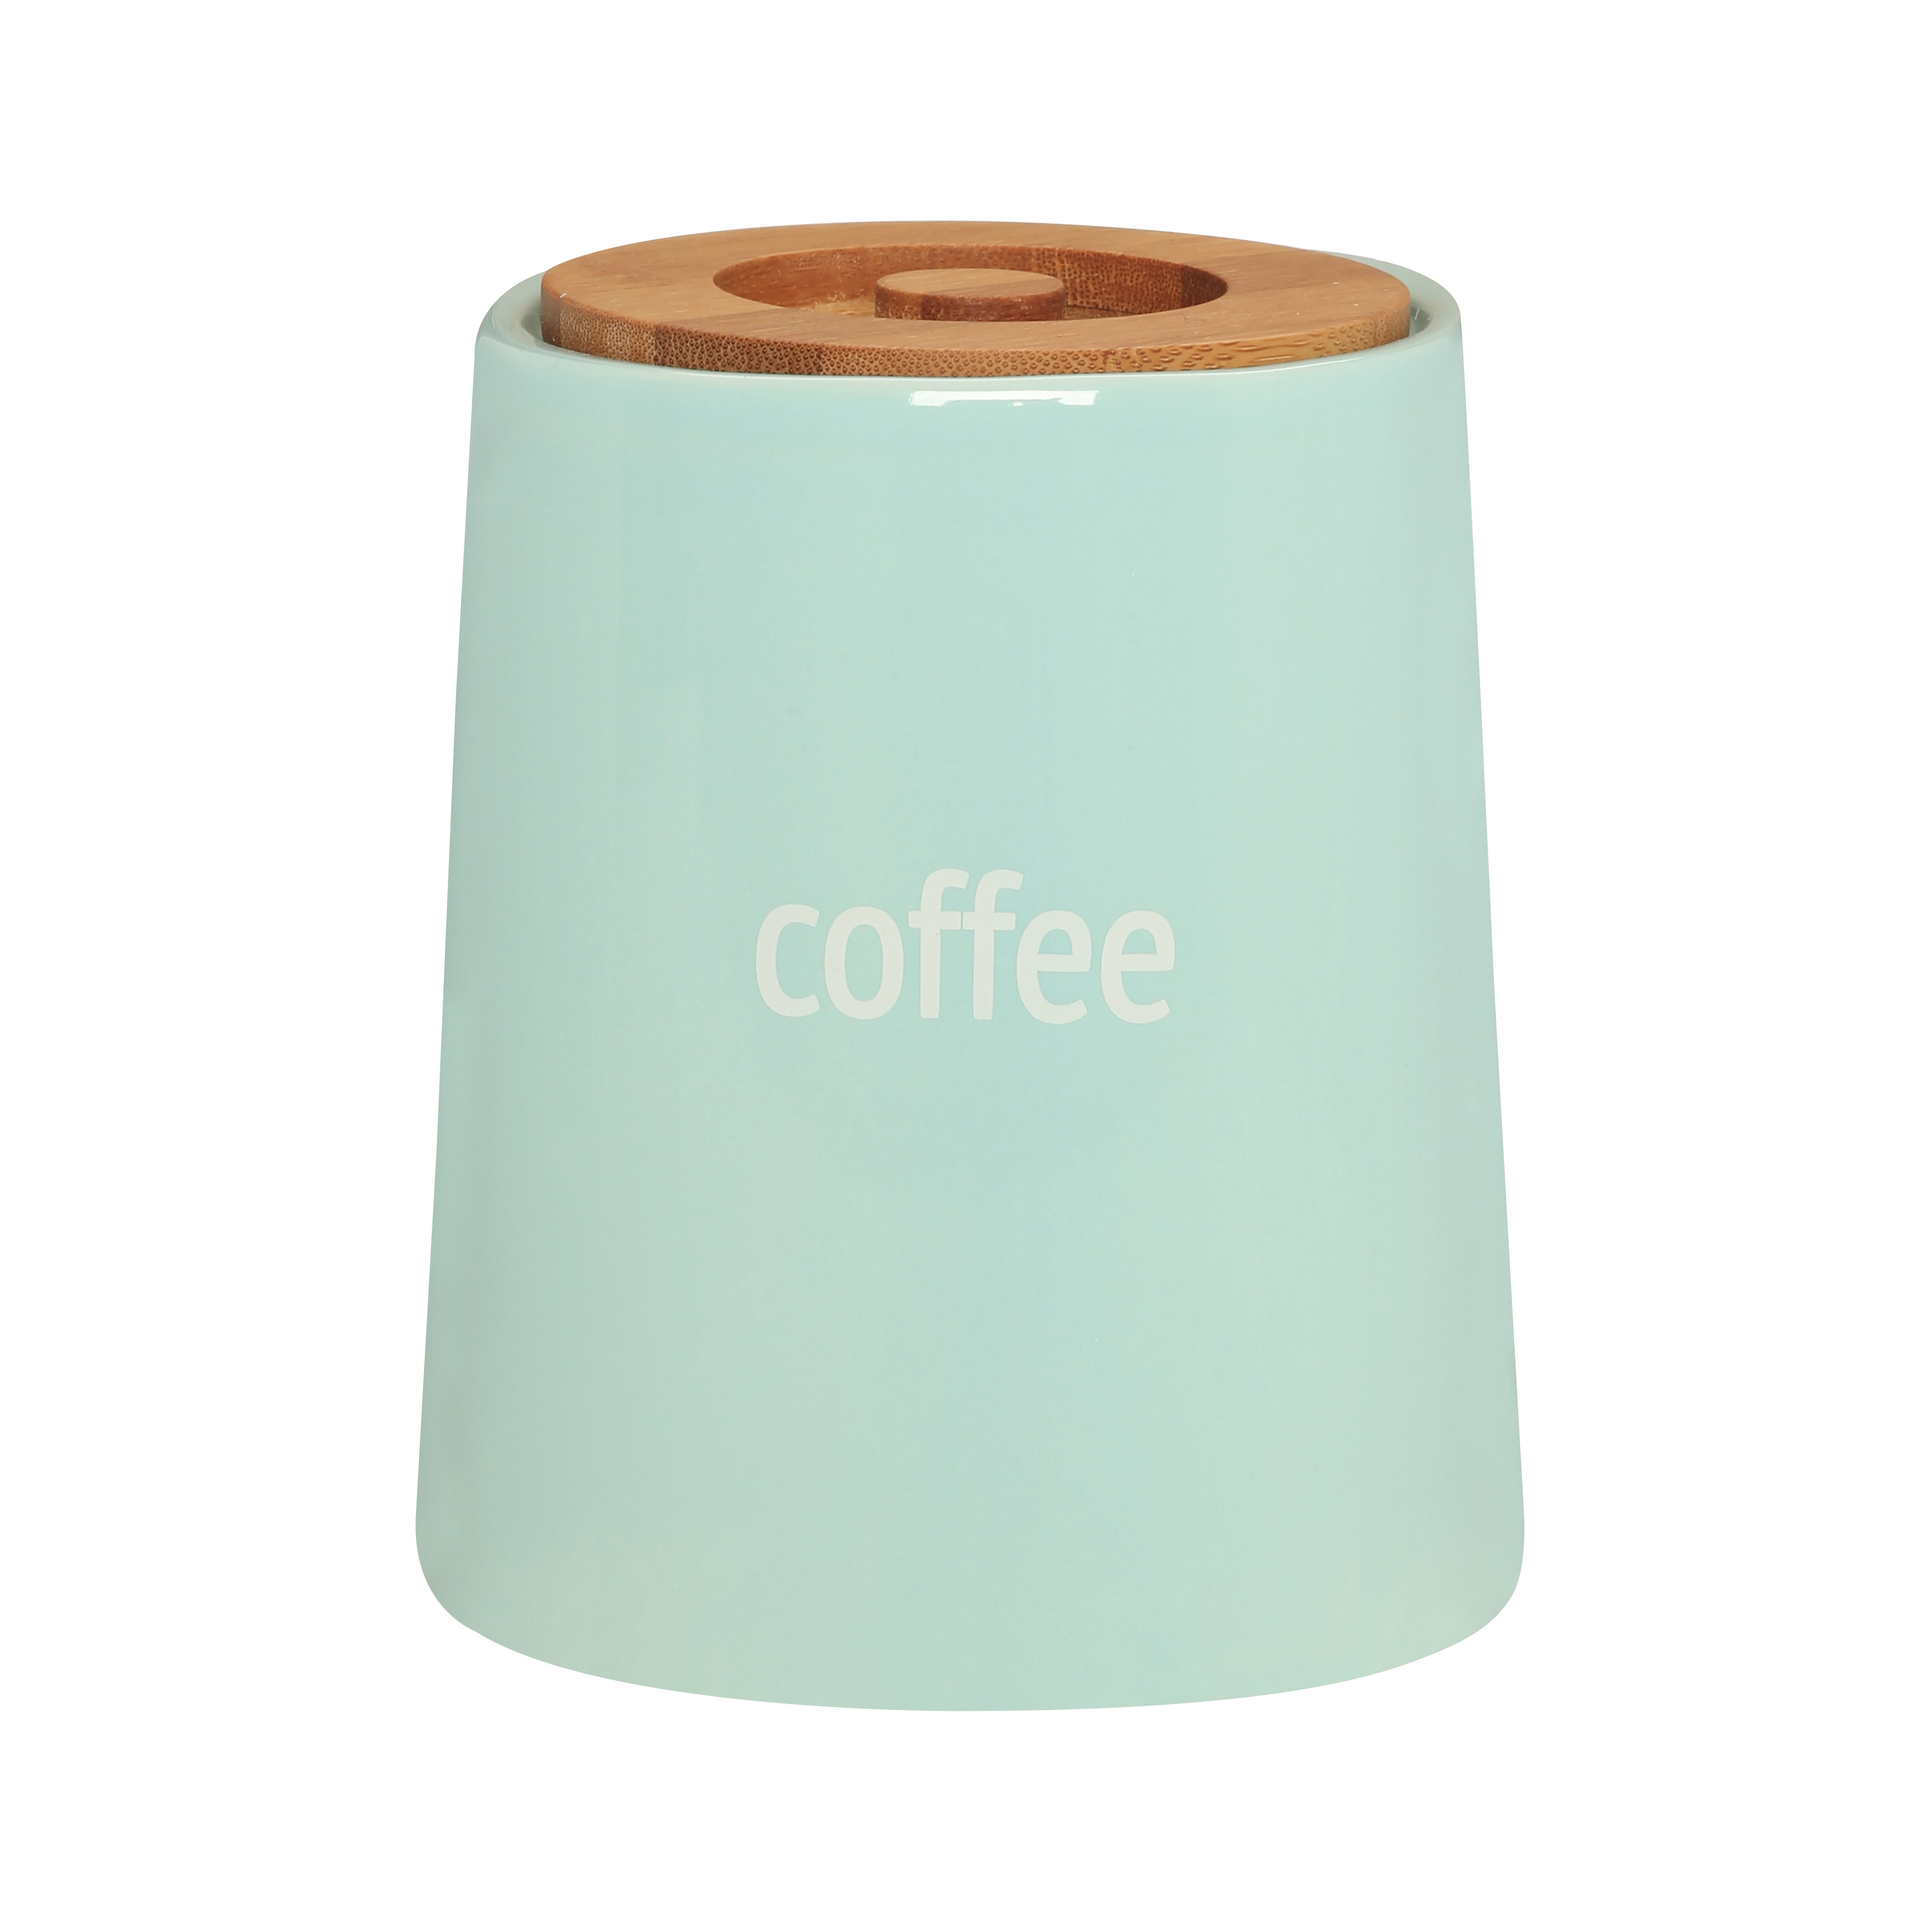 Fletcher Coffee Canister Blue Ceramic - Bamboo Lid